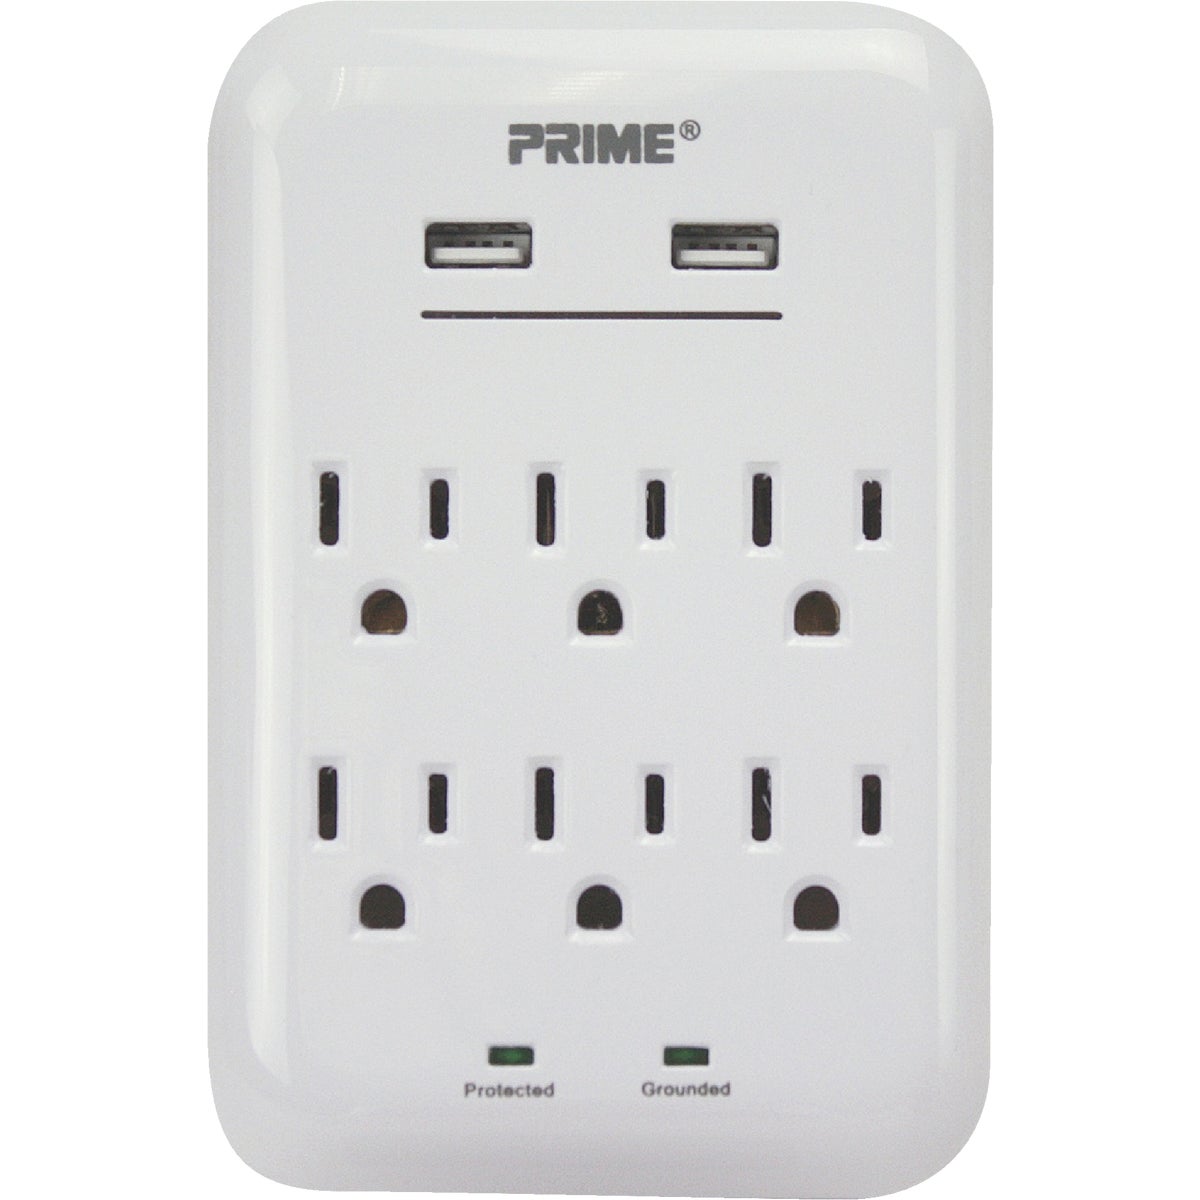 Item 501921, Plug-in outlet and USB (universal serial bus) port charger.